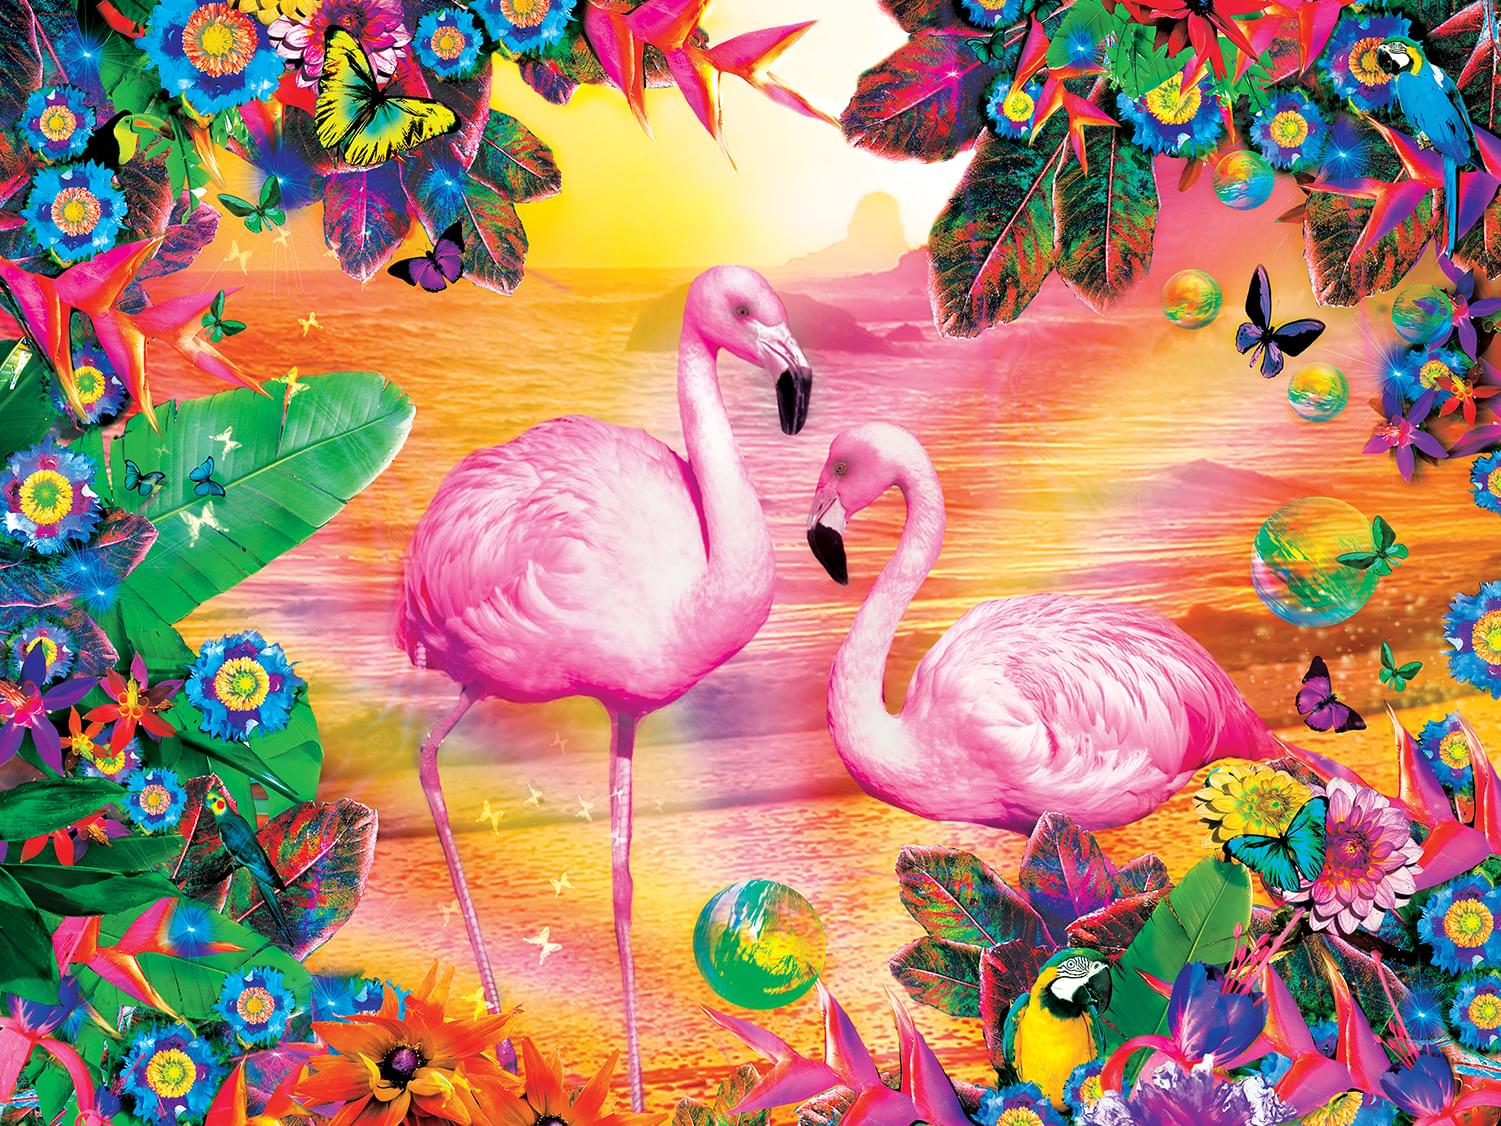 Pretty in Pink 300 Piece Large EZ Grip Jigsaw Puzzle